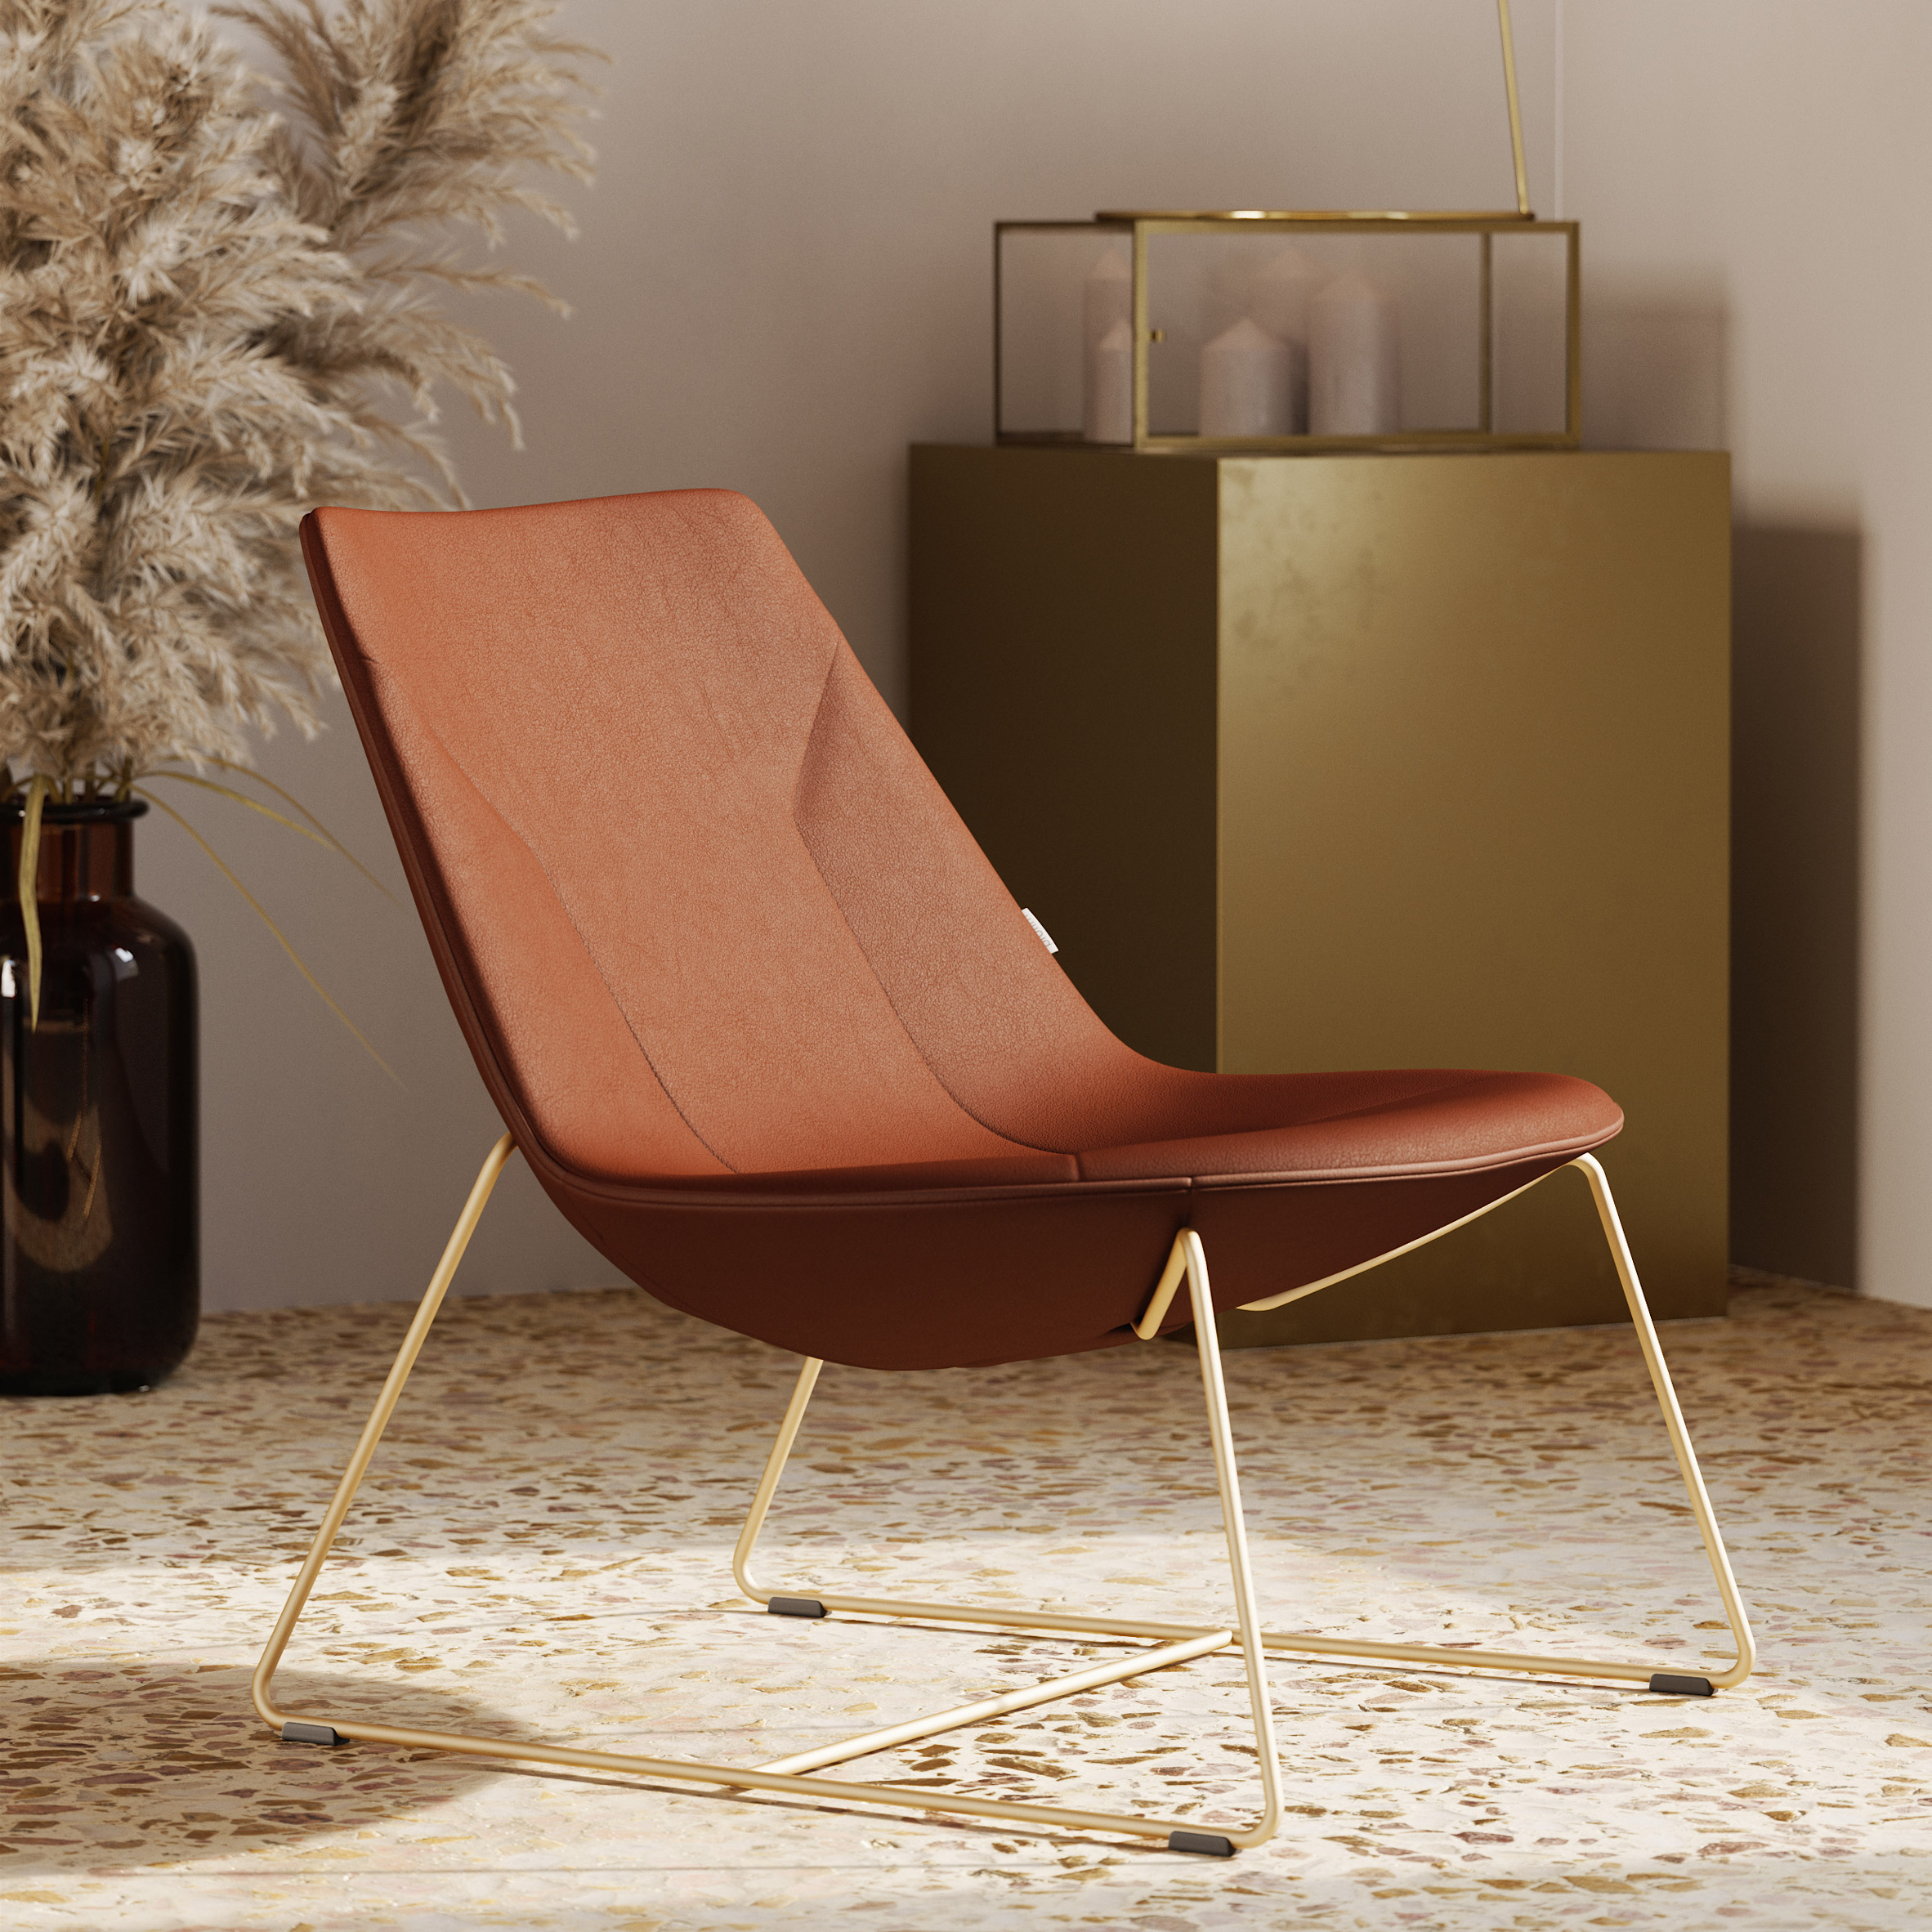 Chic Lounge by Christophe Pillet for Profim